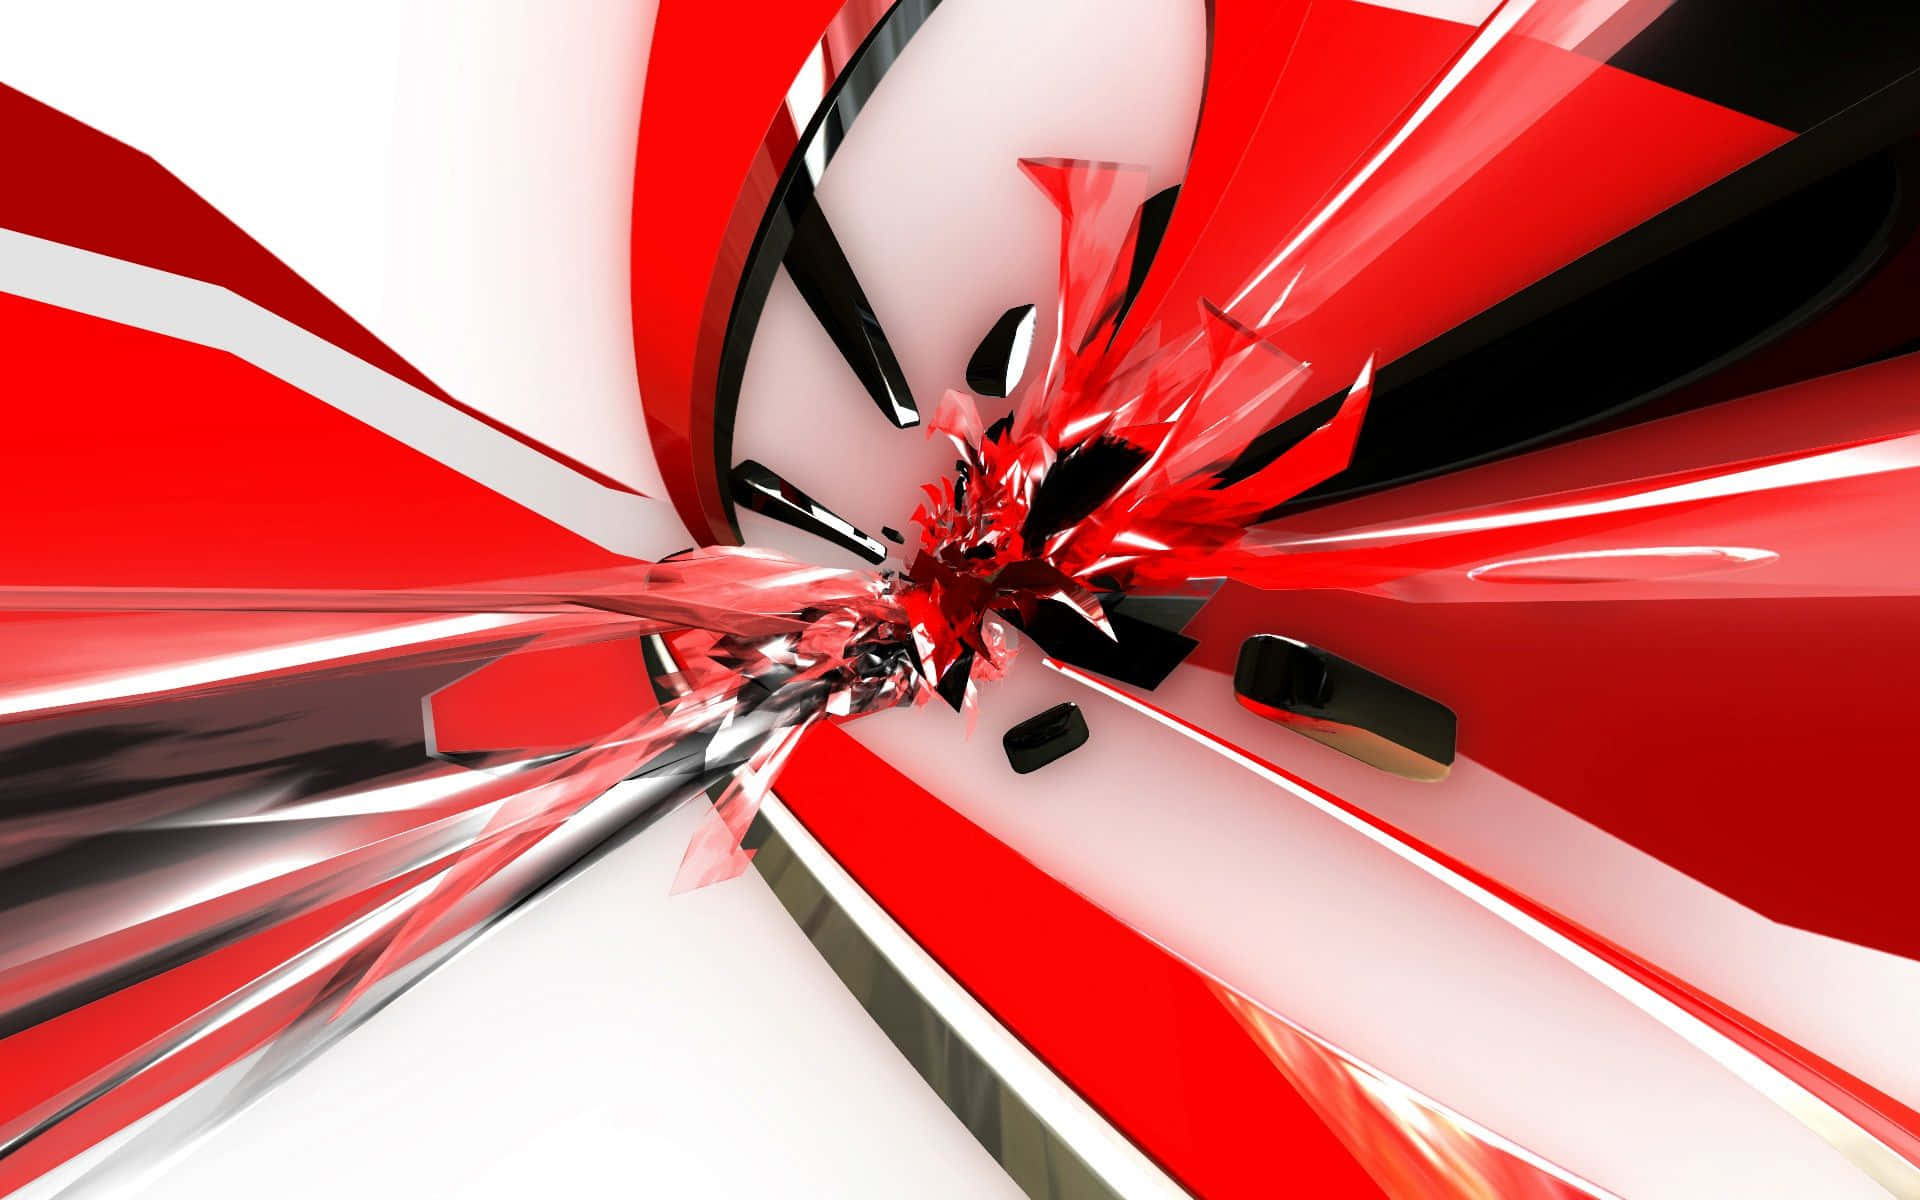 Image Abstract Artwork Background